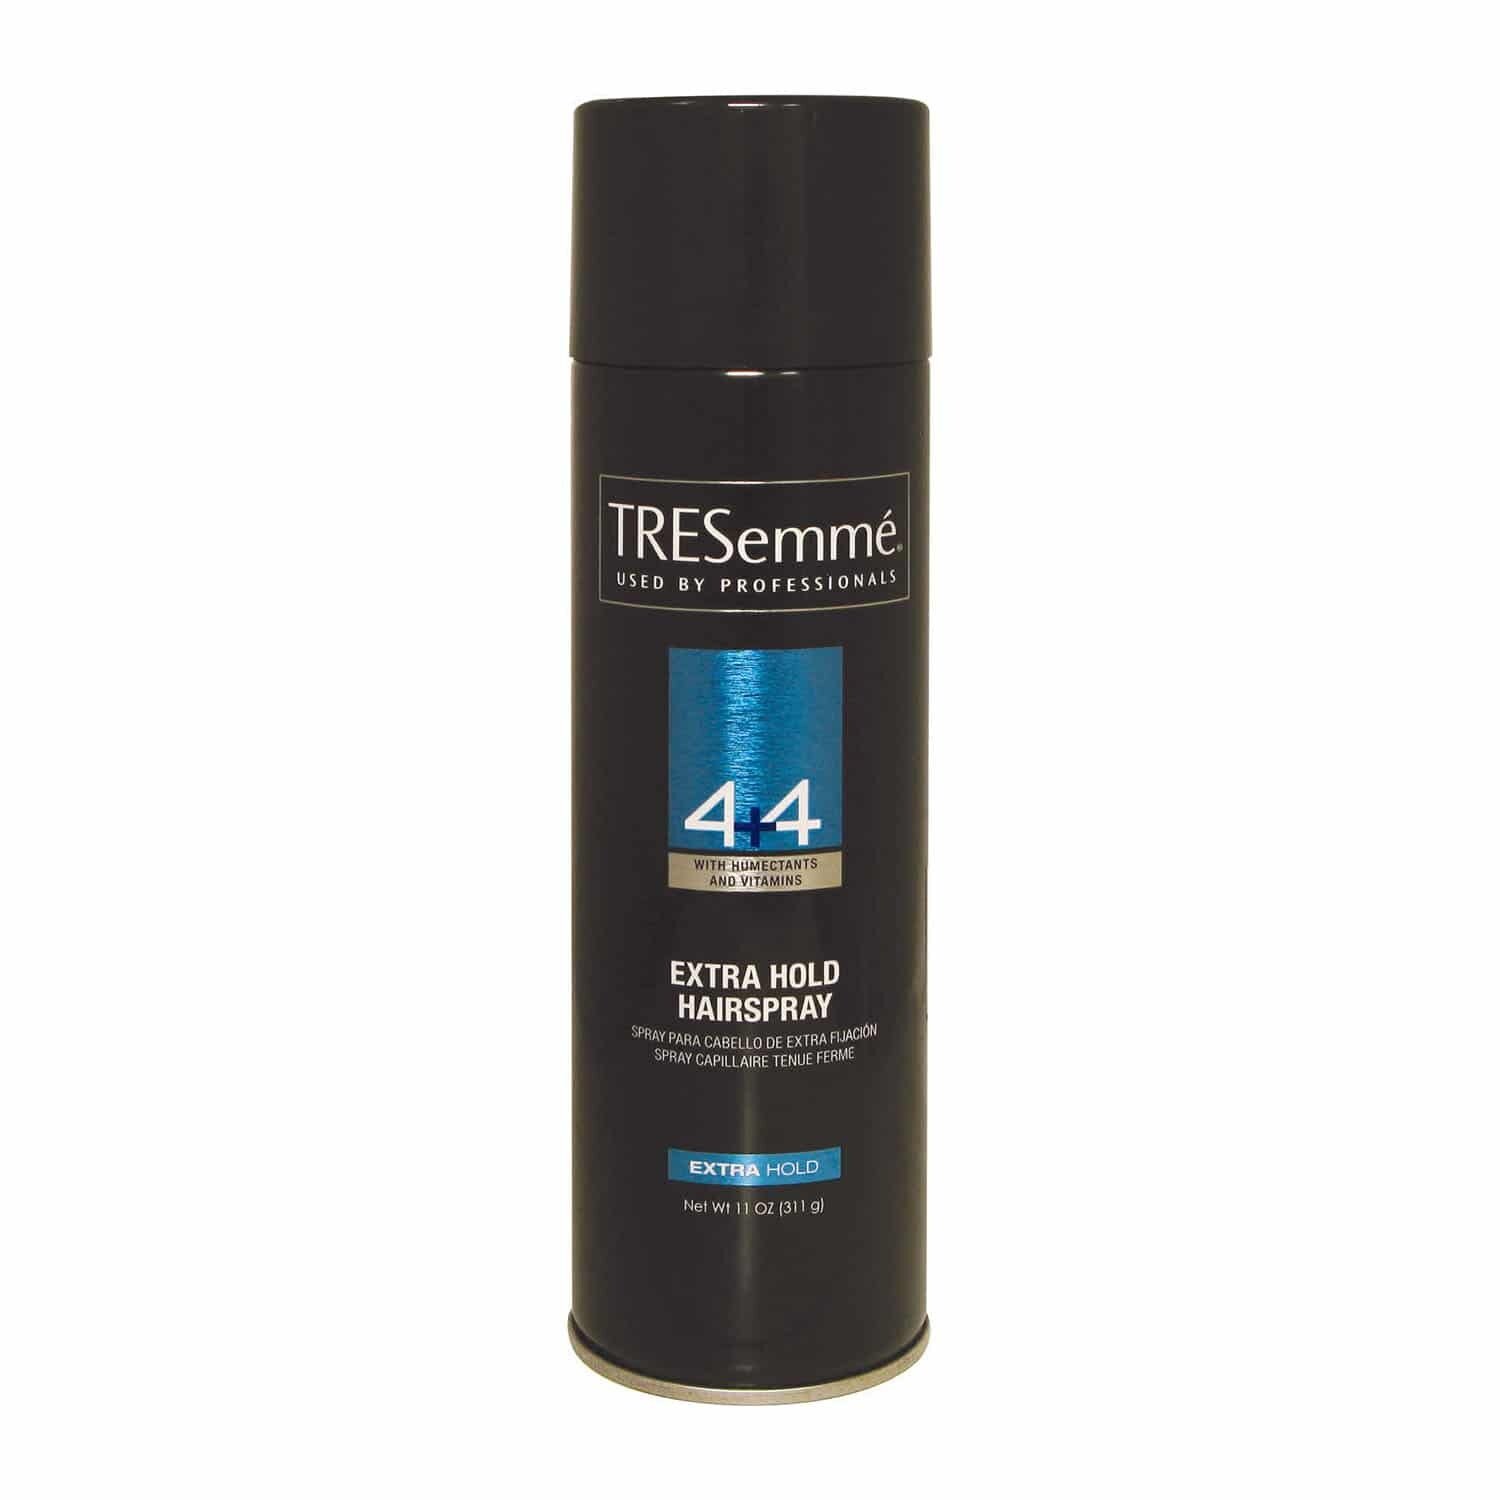 Tresemme 4+4 Hairspray (No longer Available)